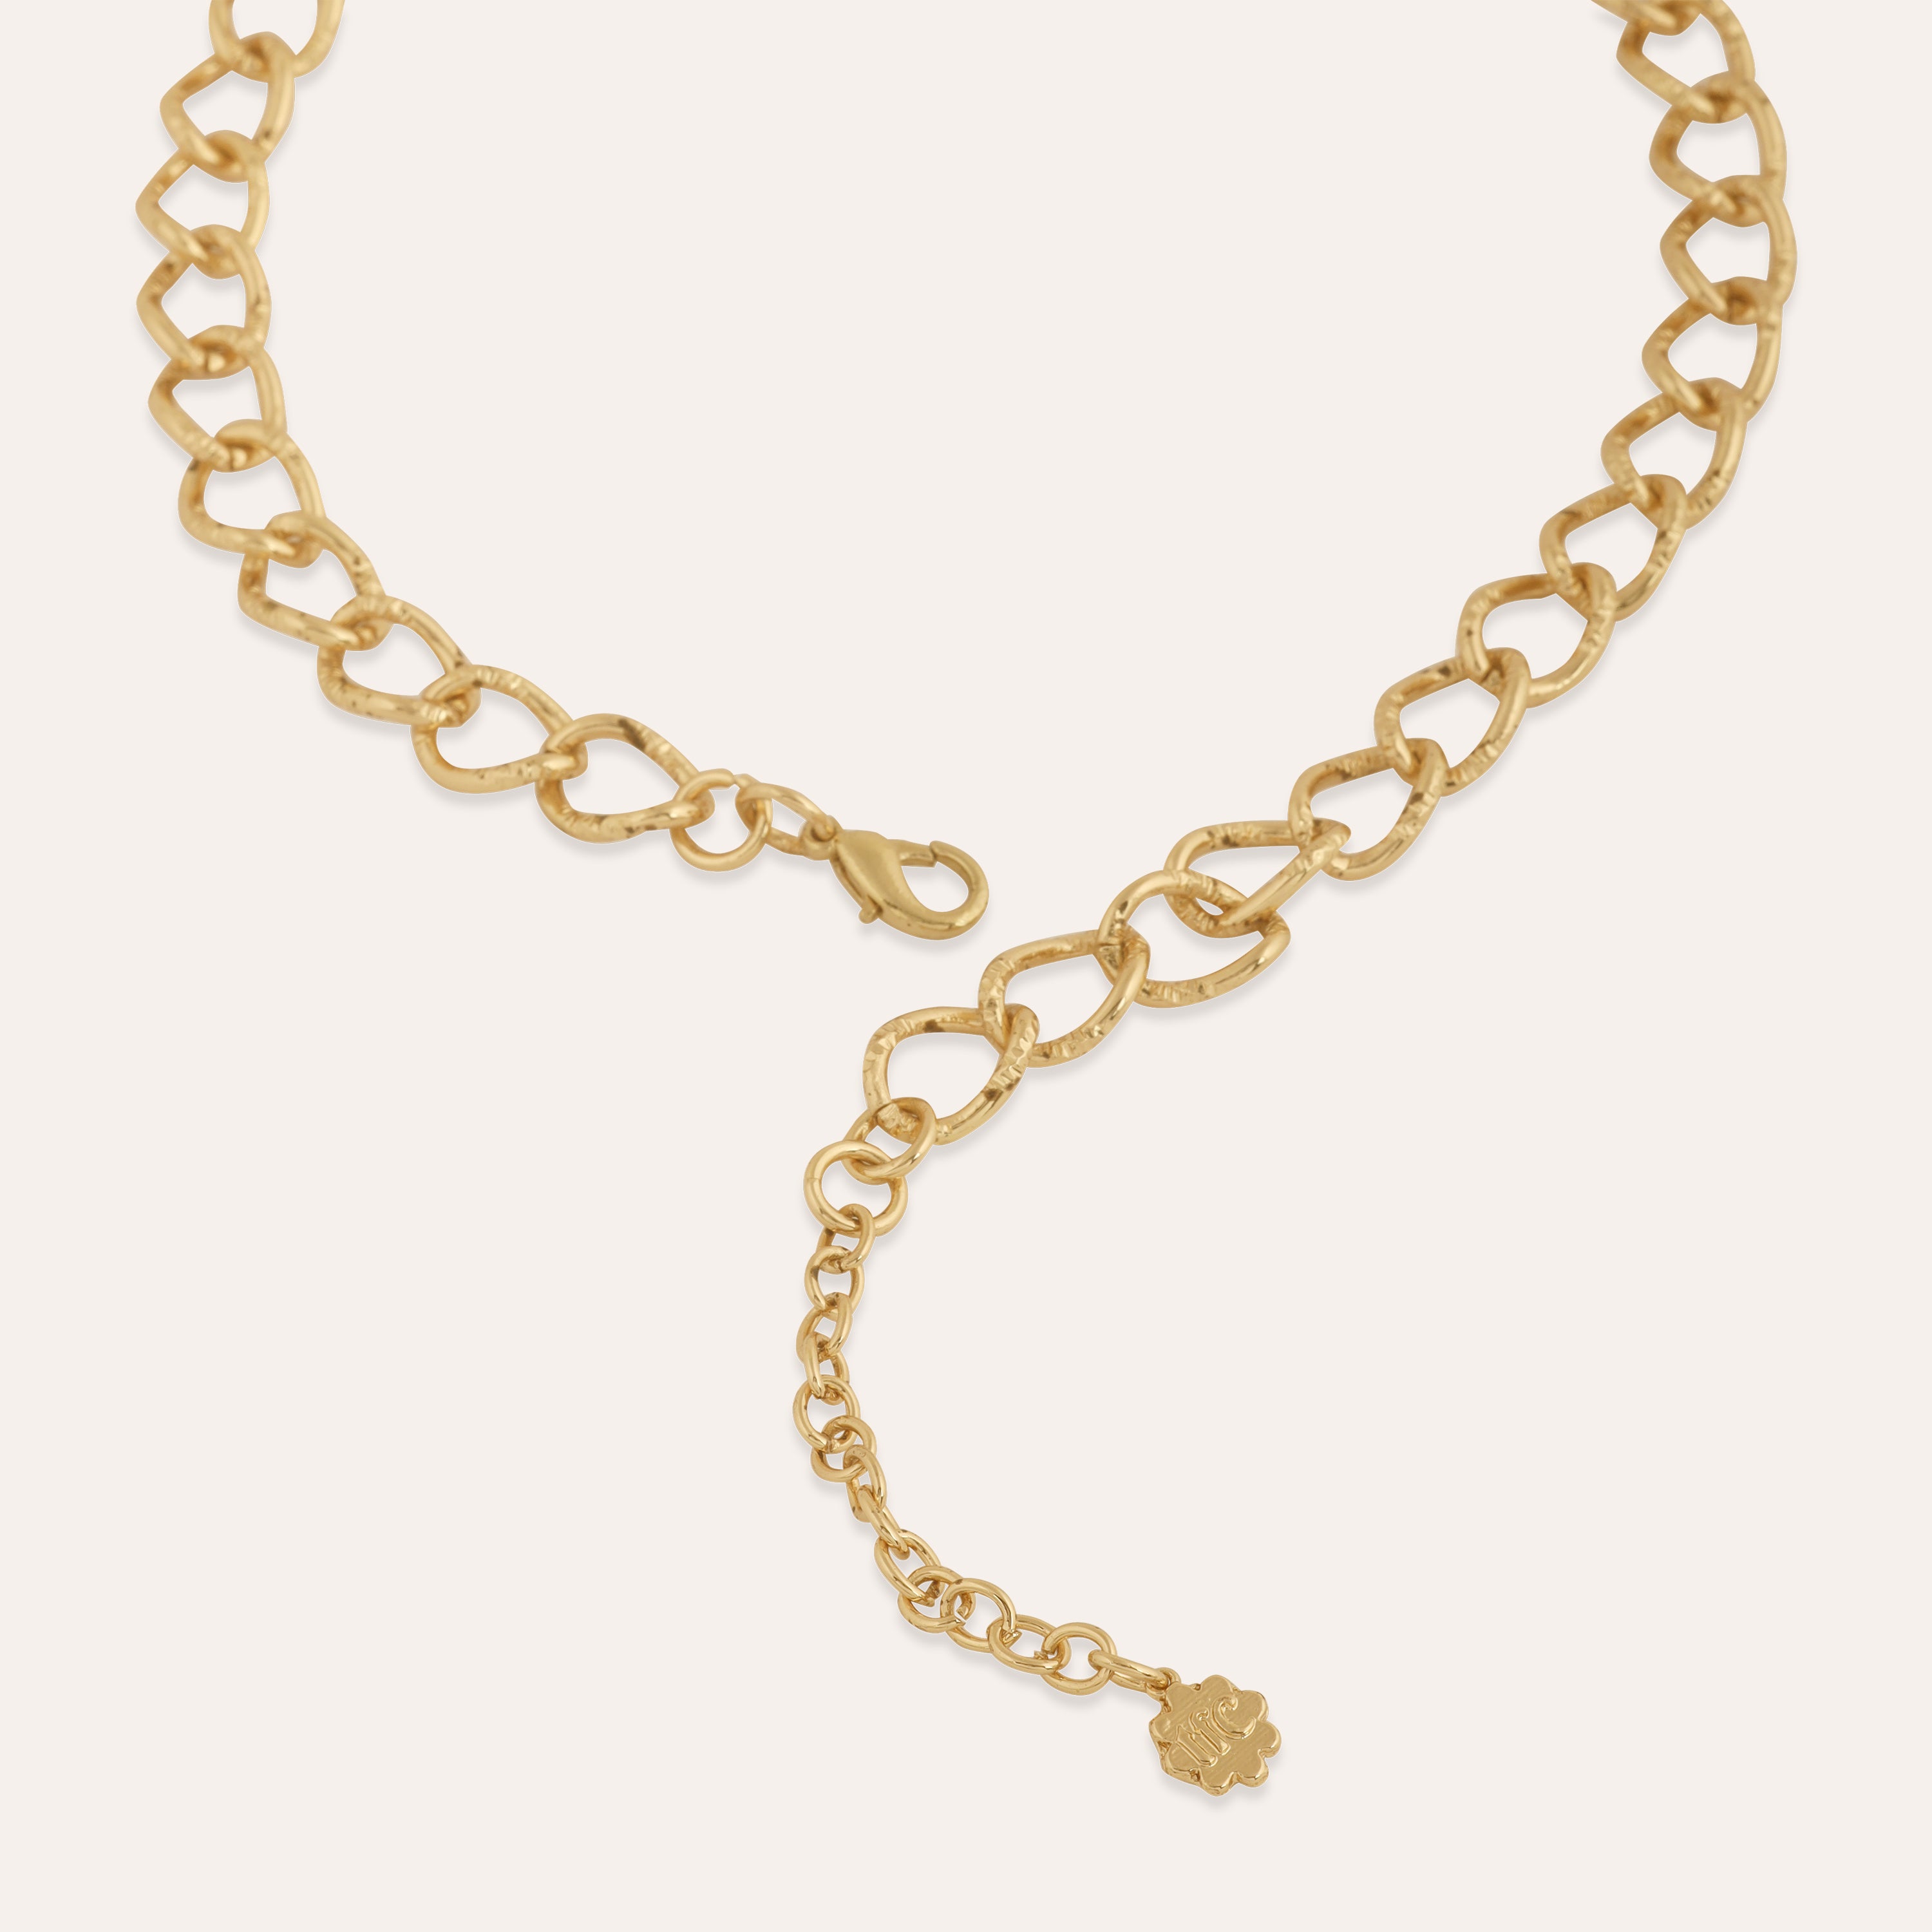 TFC Turino Luxury Gold Plated Chain Necklace-Enhance your elegance with our collection of gold-plated necklaces for women. Choose from stunning pendant necklaces, chic choker necklaces, and trendy layered necklaces. Our sleek and dainty designs are both affordable and anti-tarnish, ensuring lasting beauty. Enjoy the cheapest fashion jewellery, lightweight and stylish- only at The Fun Company